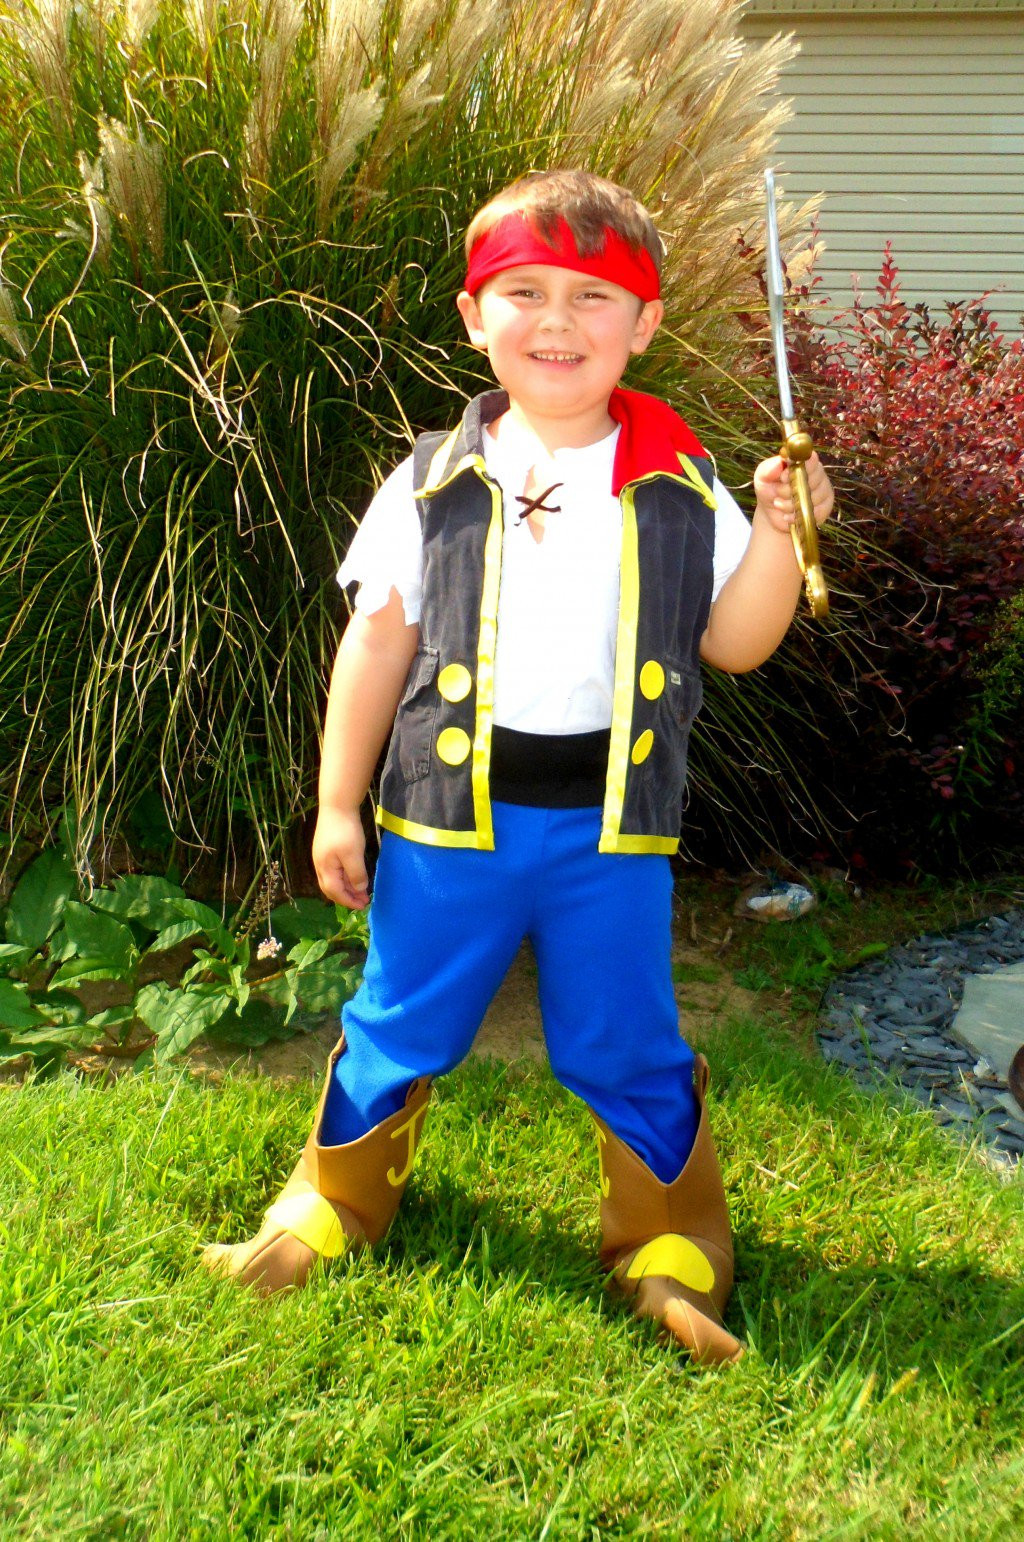 DIY Pirate Costume
 How to Make a Jake and the Never Land Pirates Costume